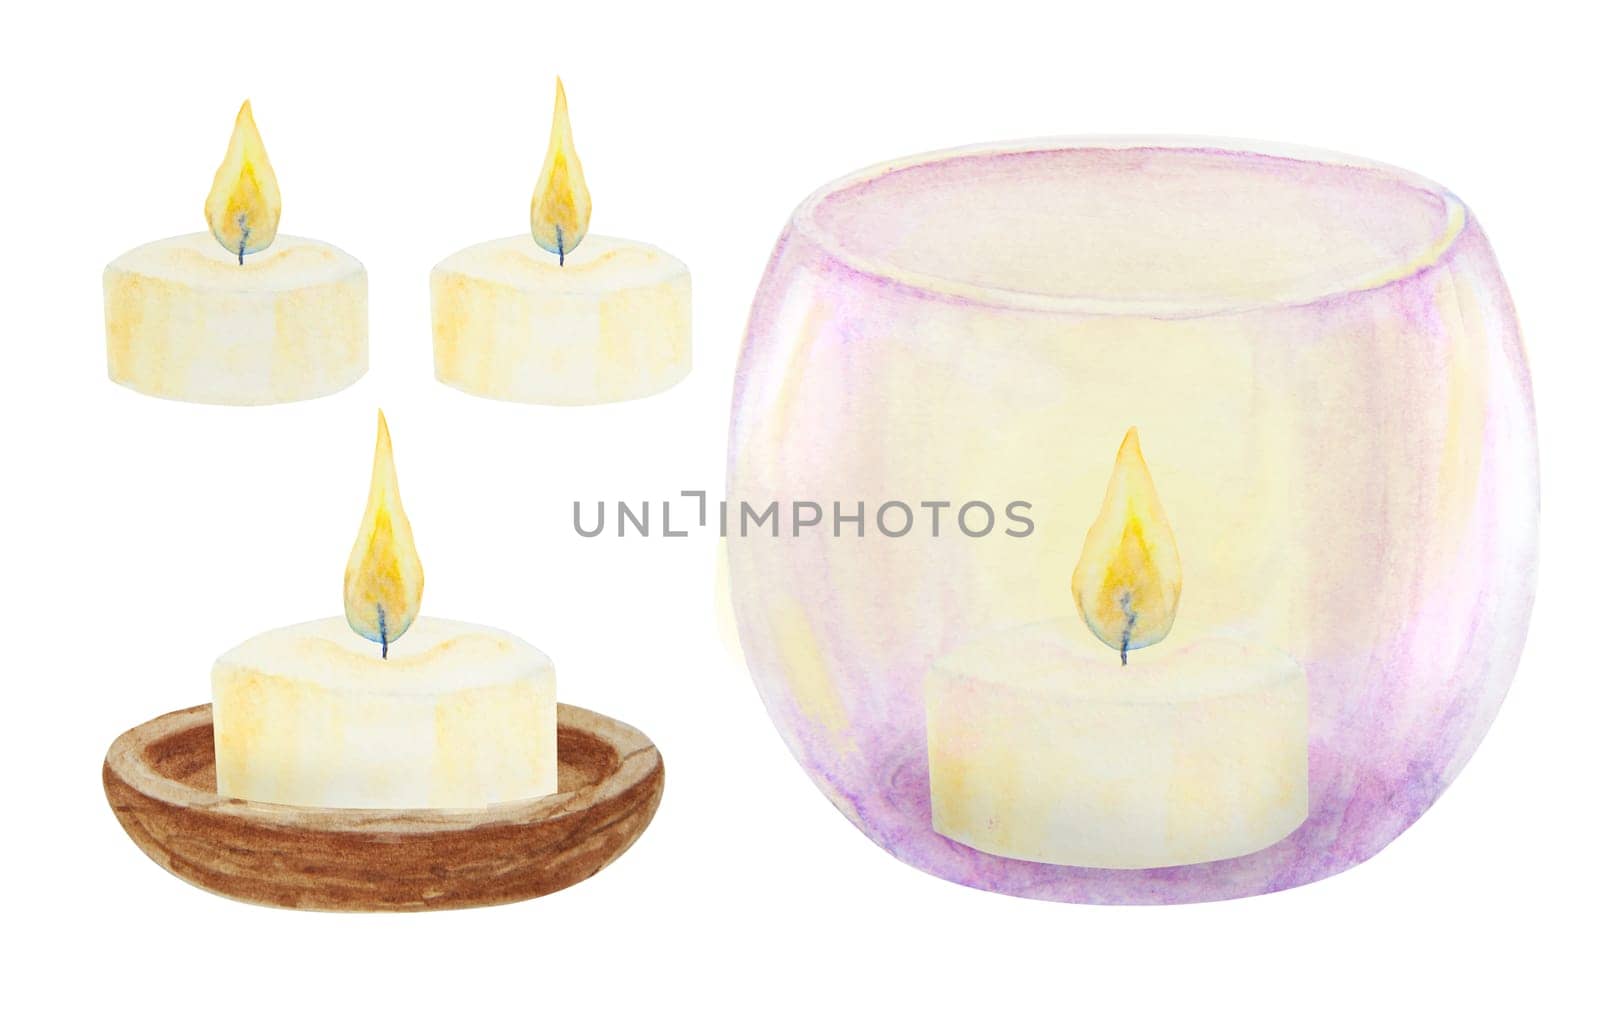 Set of violet glass and wooden candlesticks, candles. Hand drawn watercolor illustration. Good for event, Christmas decoration, romantic, wedding designs by florainlove_art